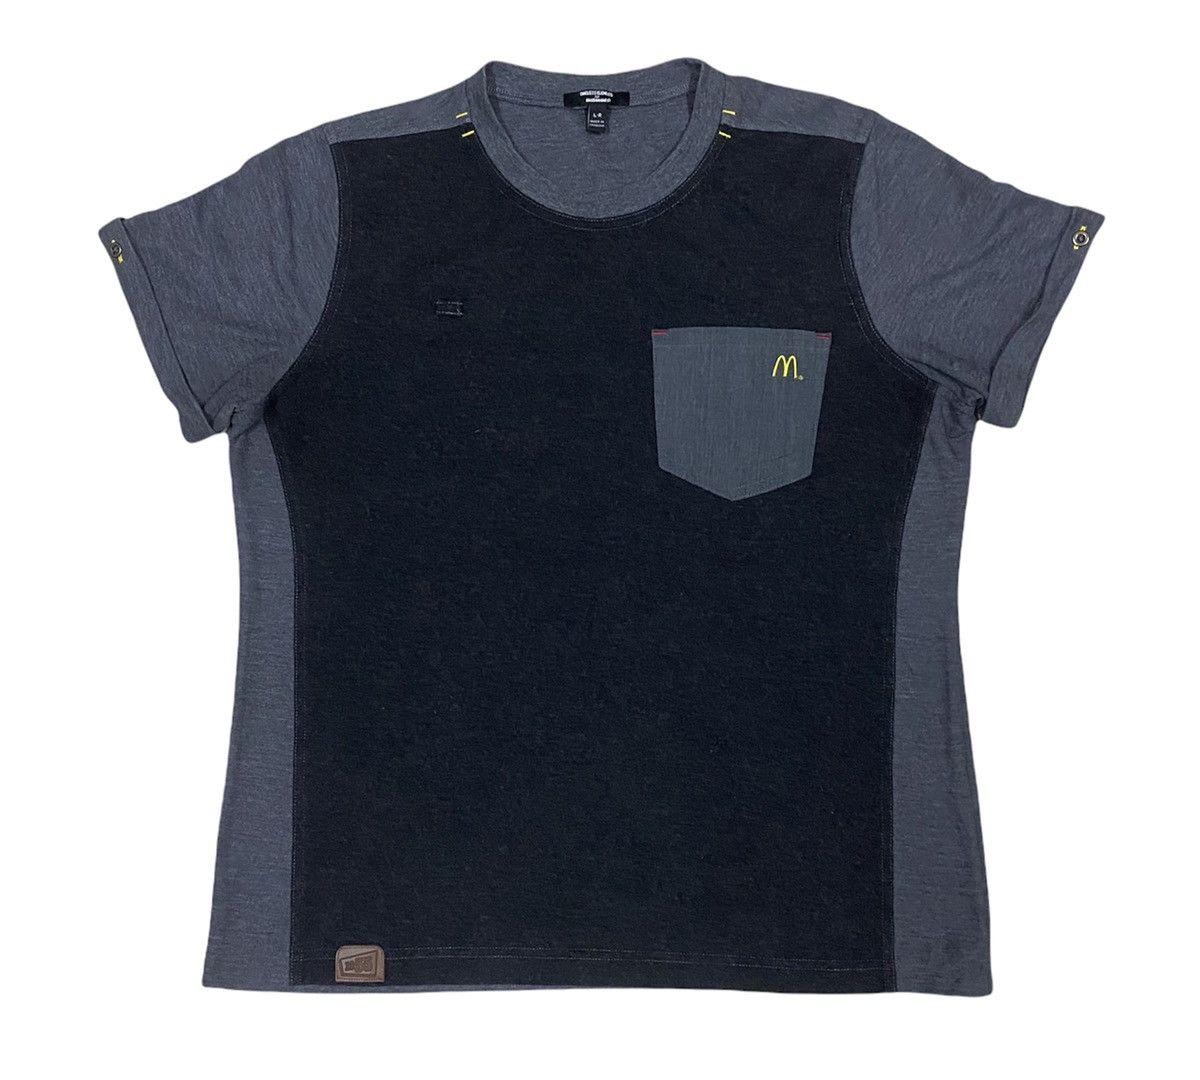 Workers TIMELESS ELEMENTS for MCDonald's Unisex Shirt x Rare Size US L / EU 52-54 / 3 - 1 Preview